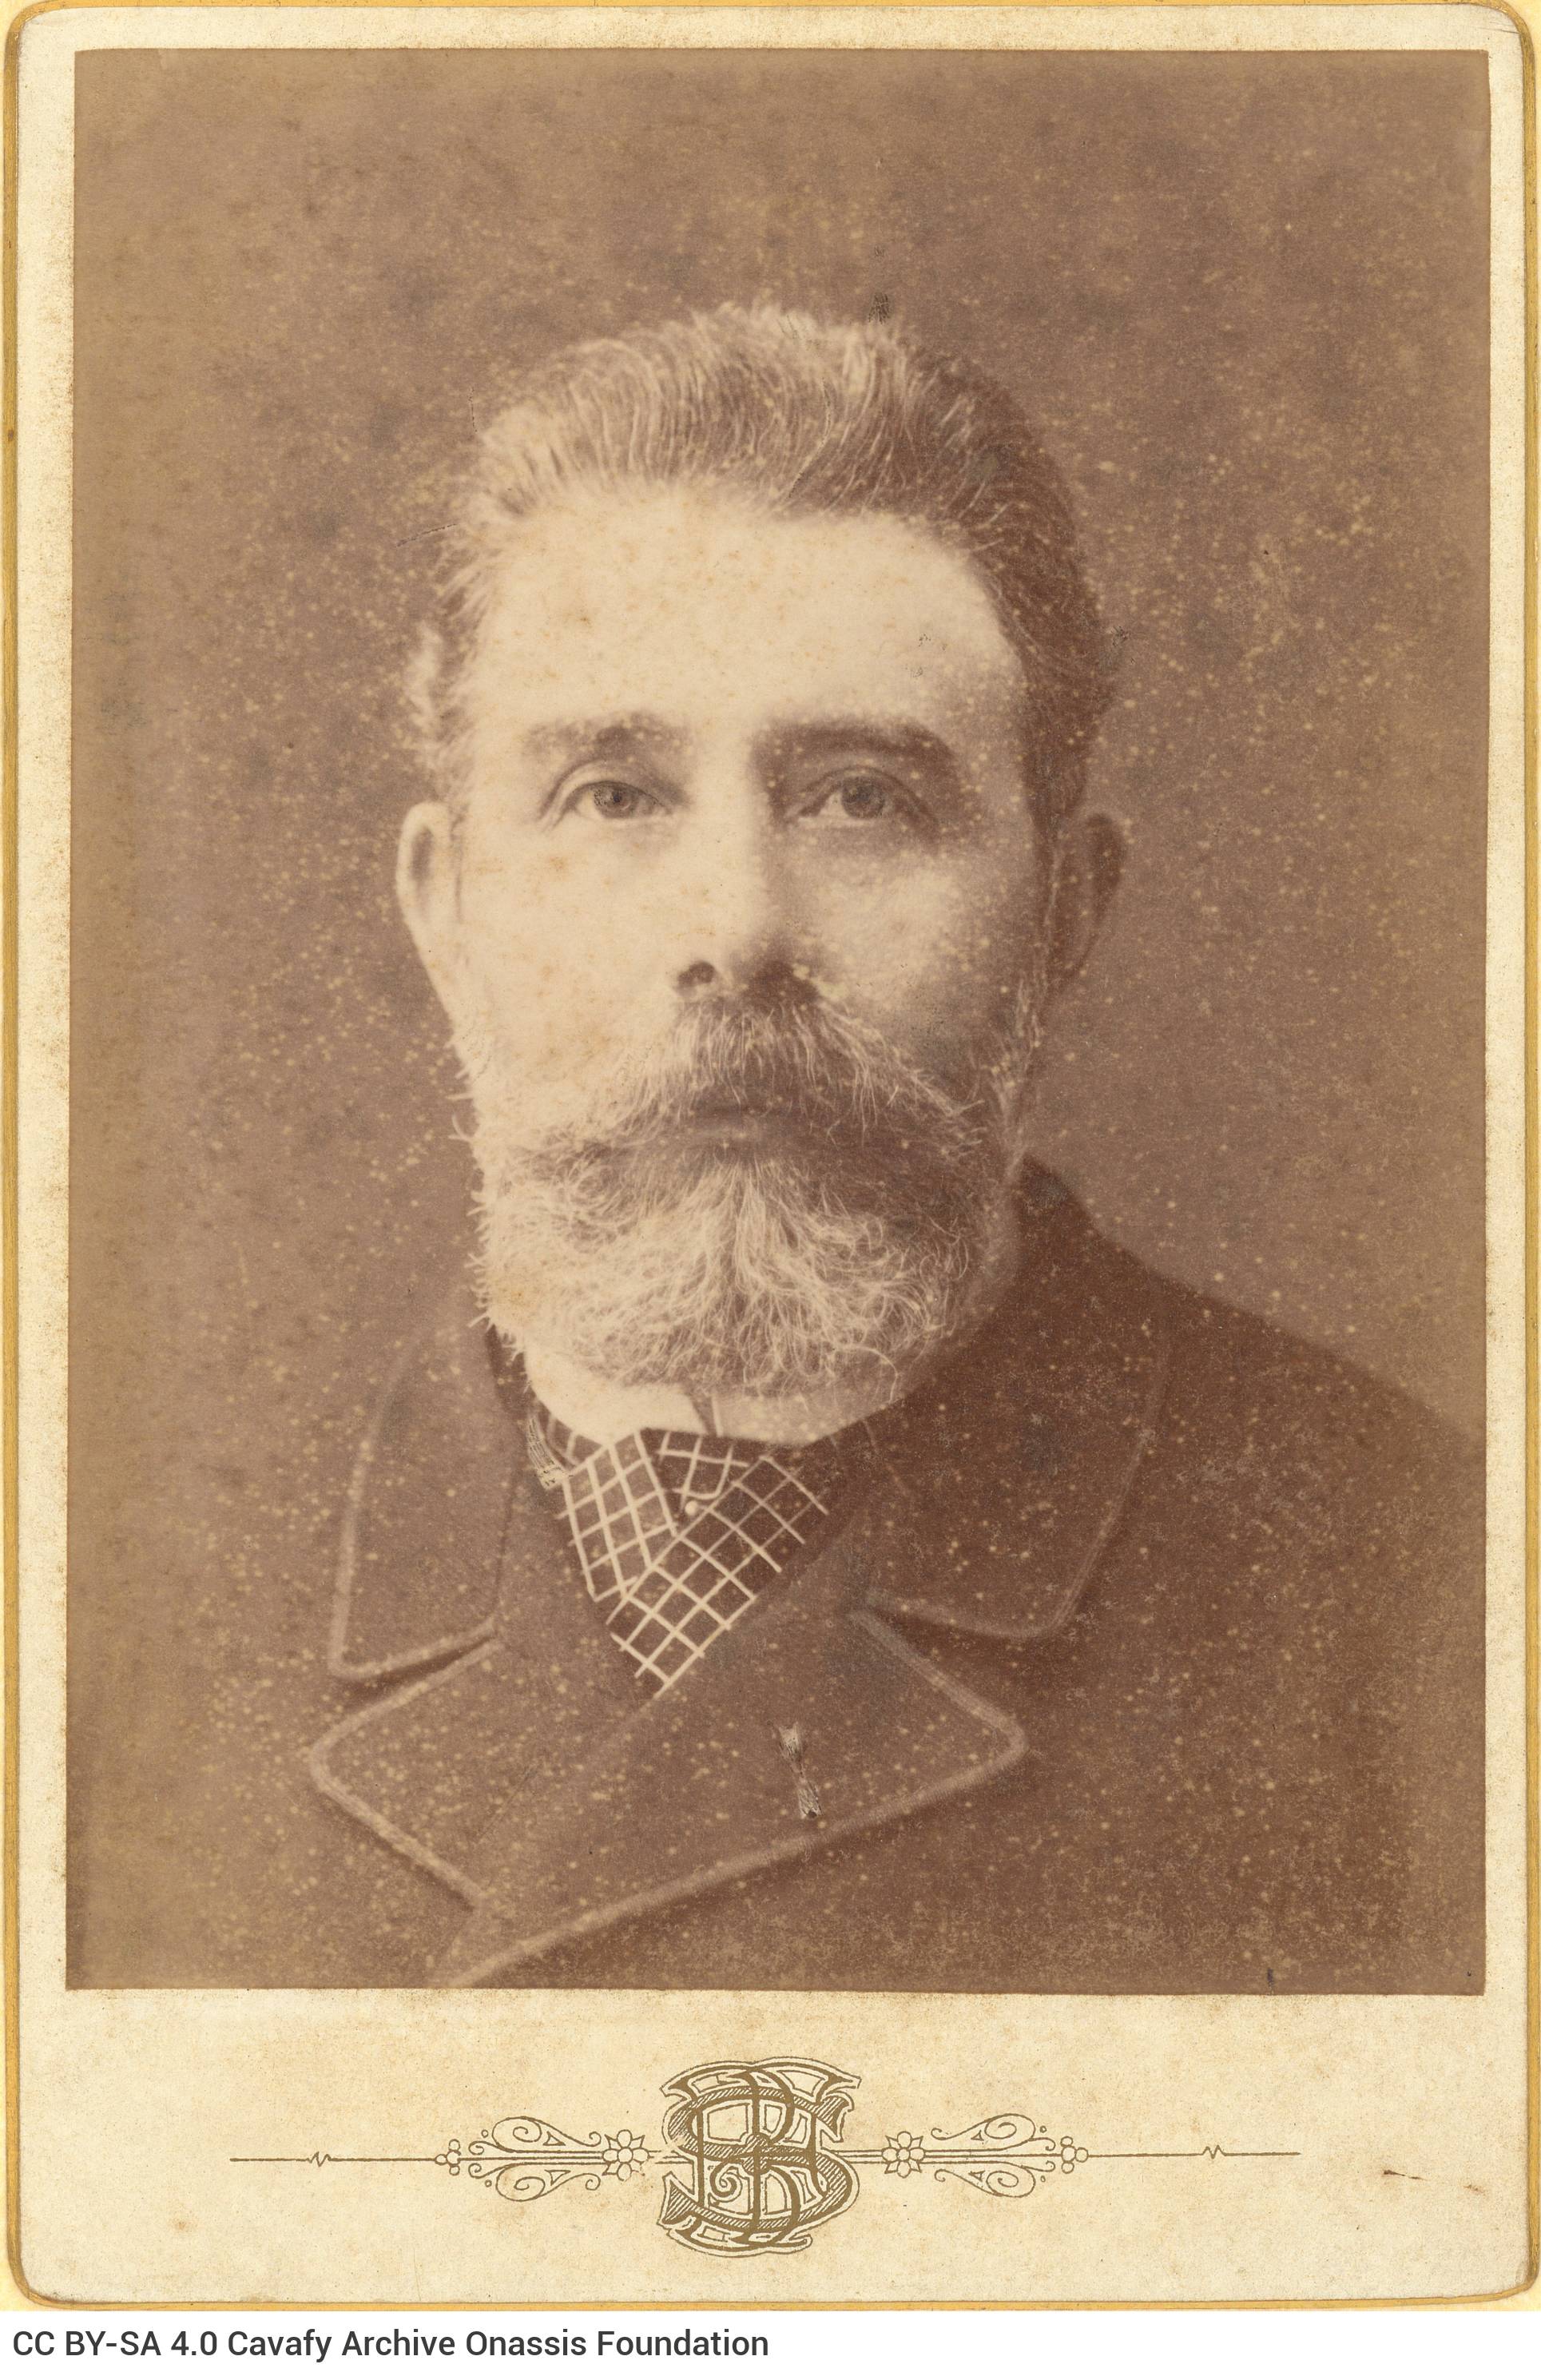 Photographic portrait of a man in a moustache, beard and plaid necktie. The logo of the photo shop in the lower part of the r